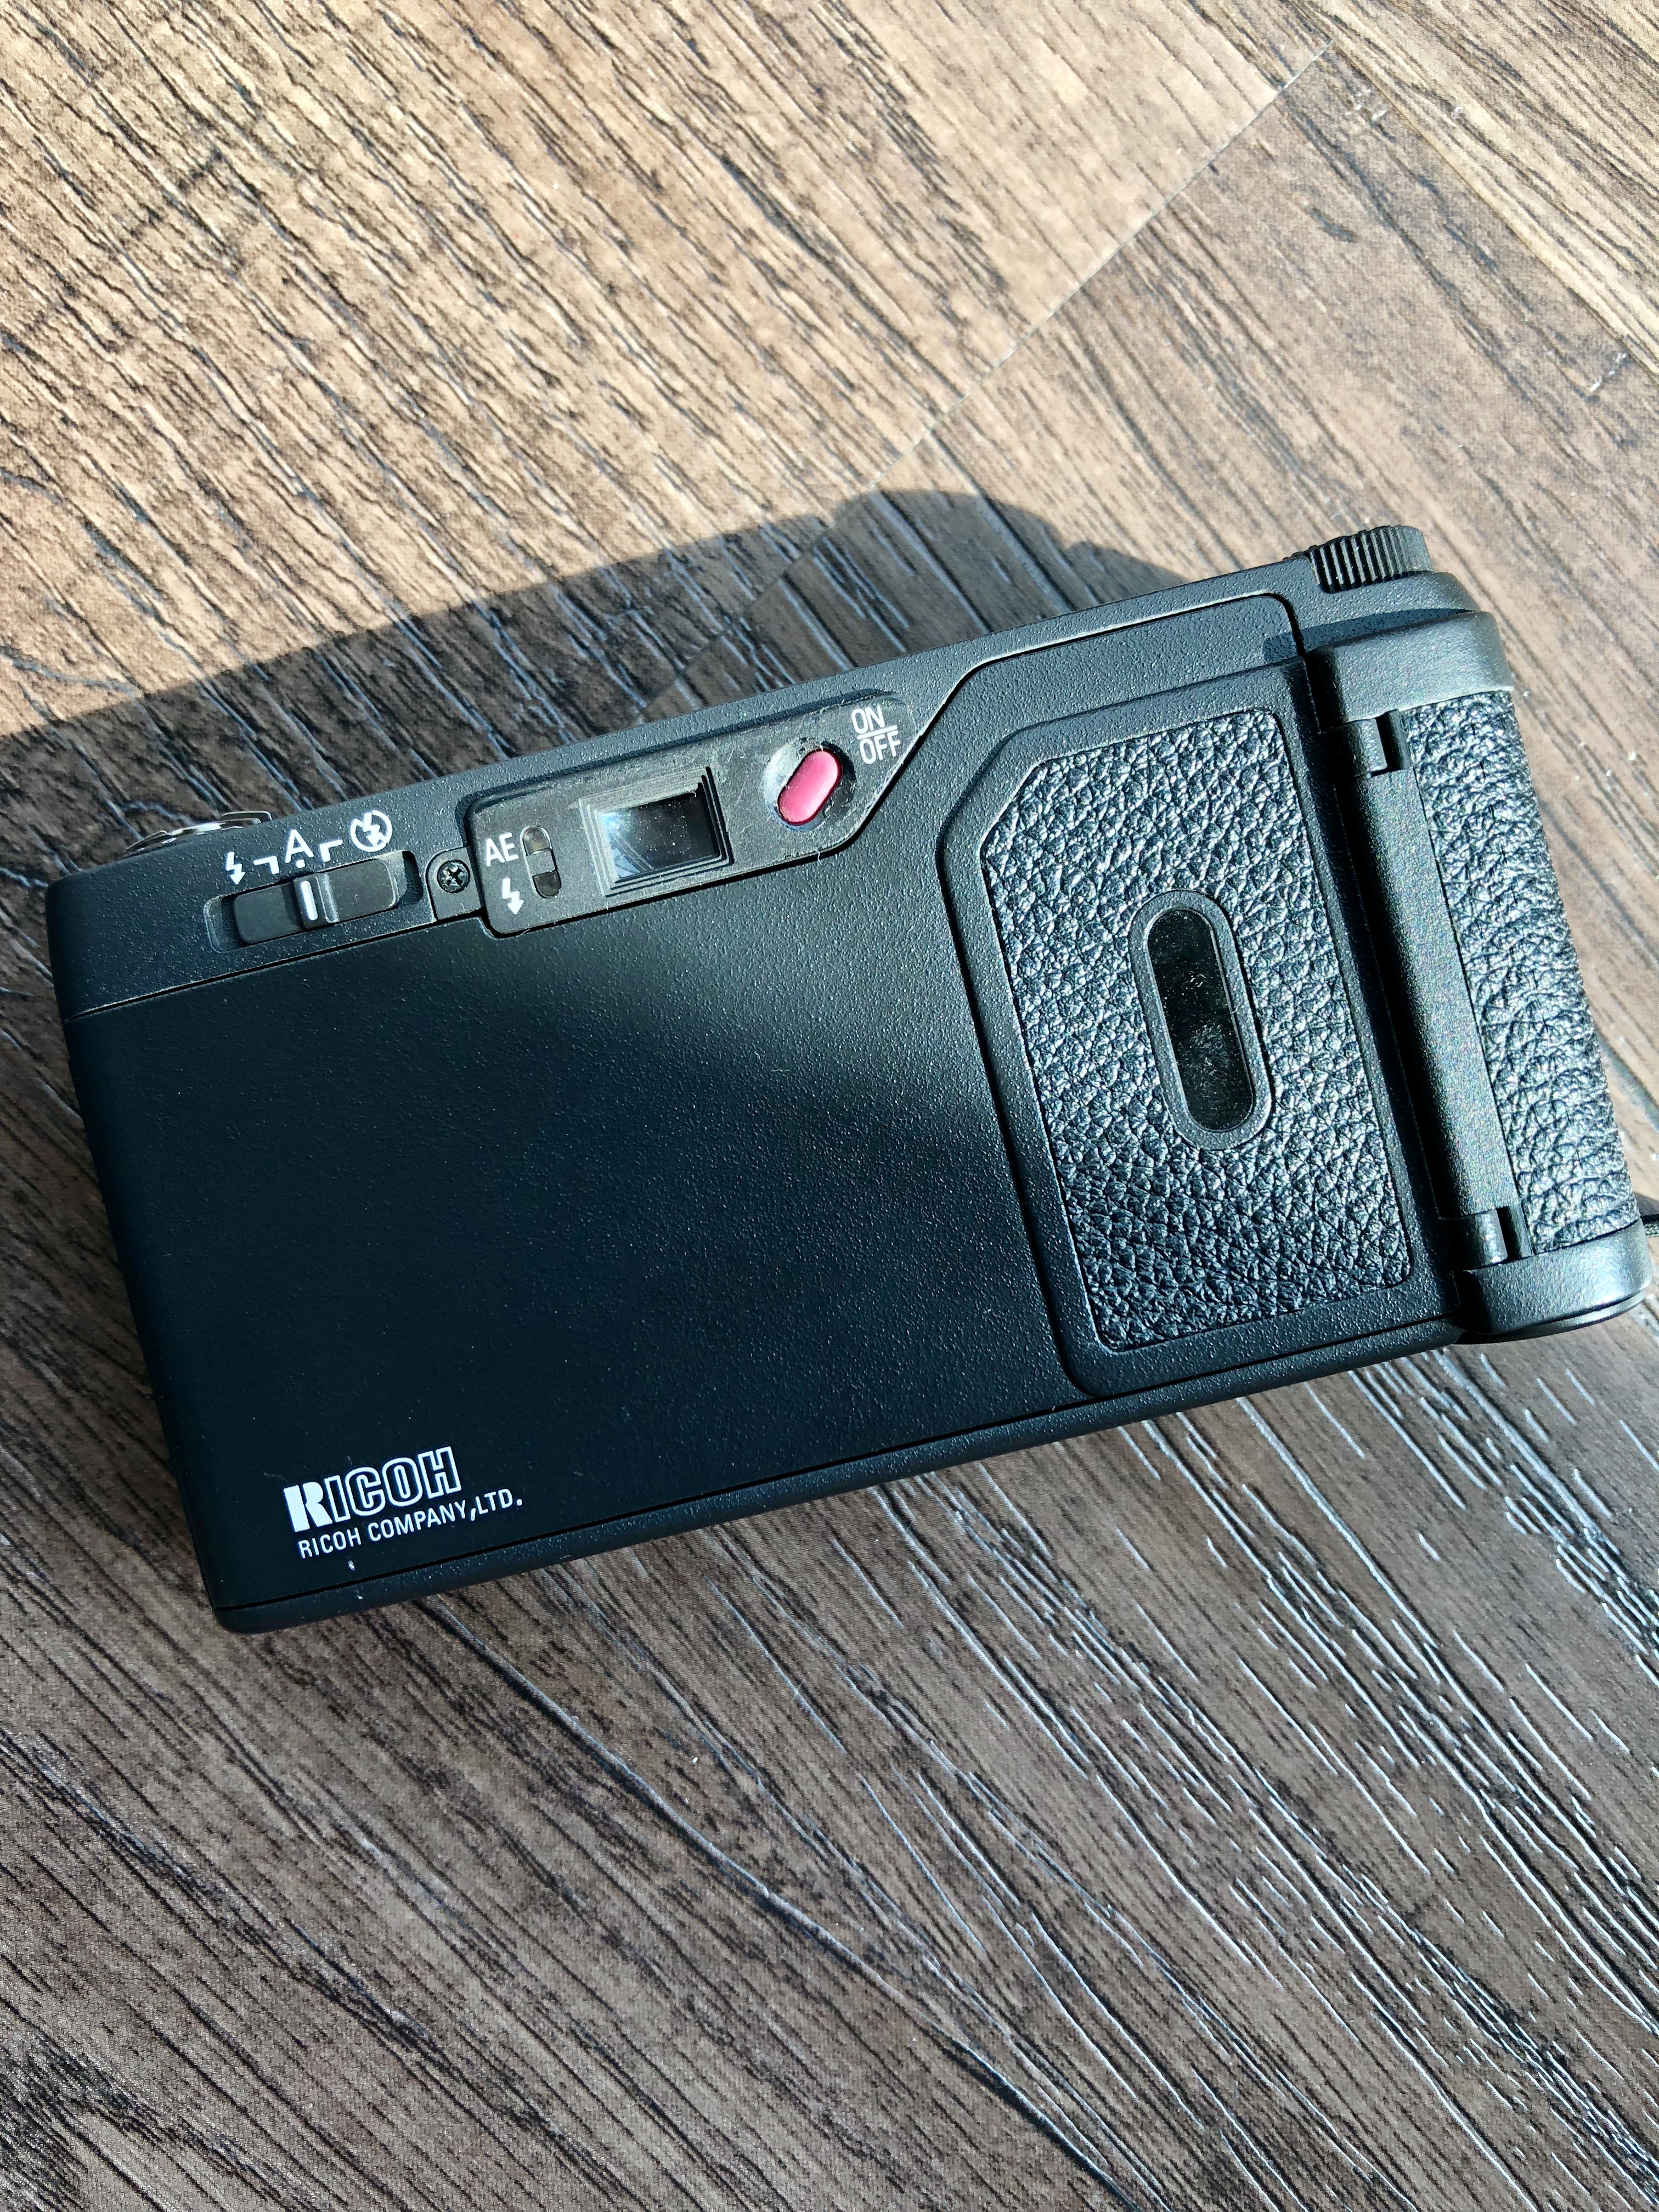 Film camera Review: The Ricoh GR1v in 2018 – KeithWee | Photography